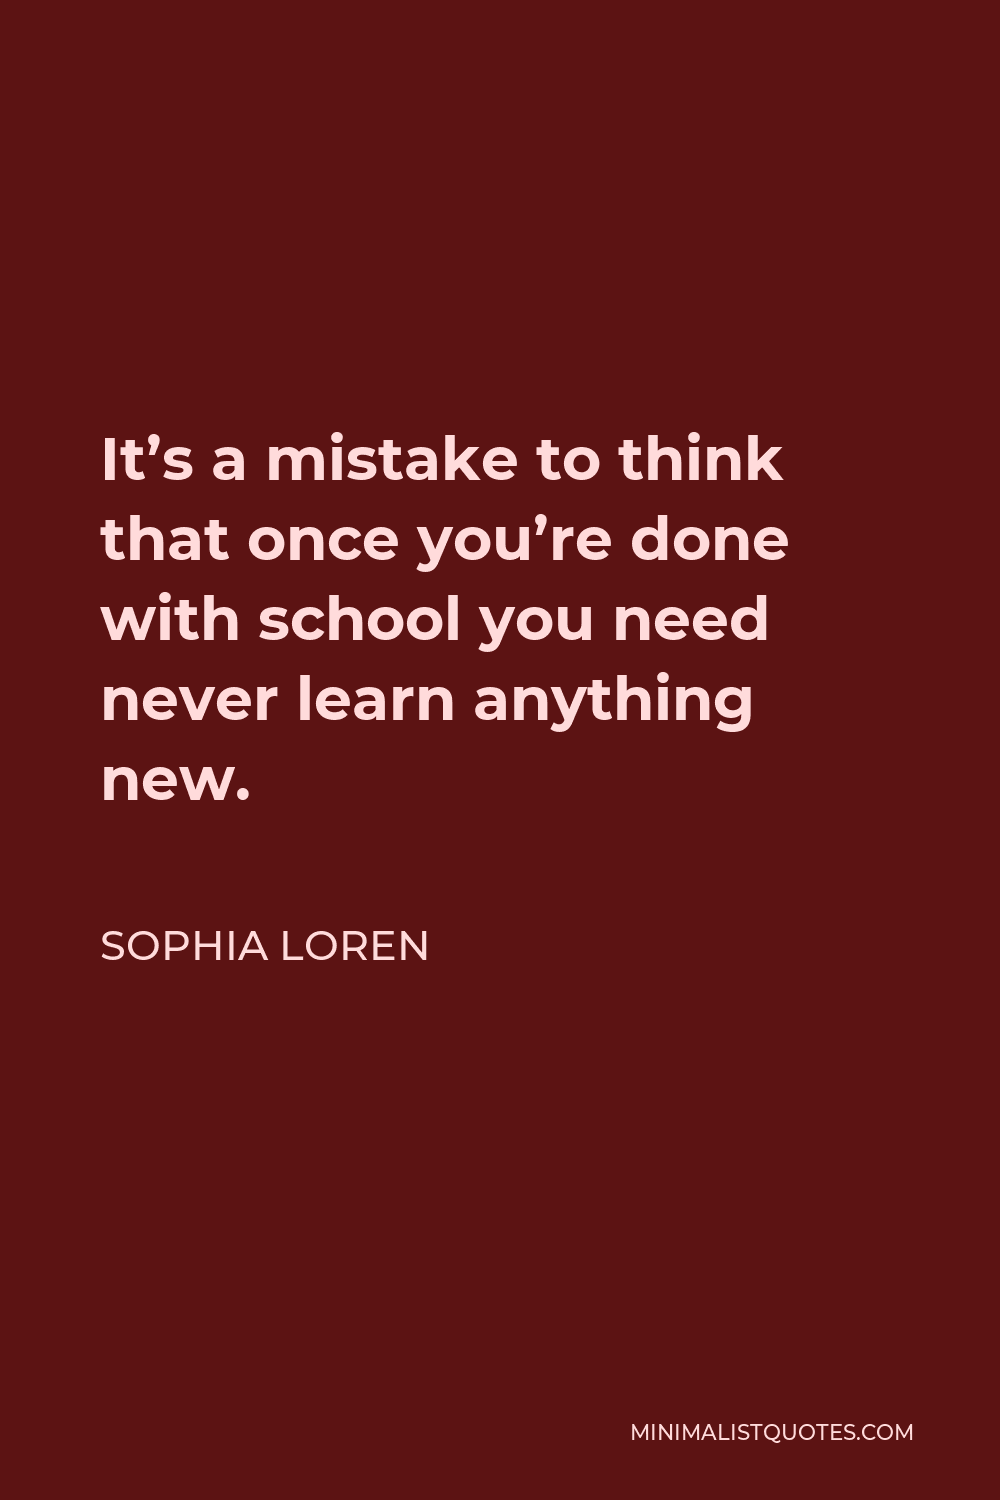 Sophia Loren Quote - It’s a mistake to think that once you’re done with school you need never learn anything new.